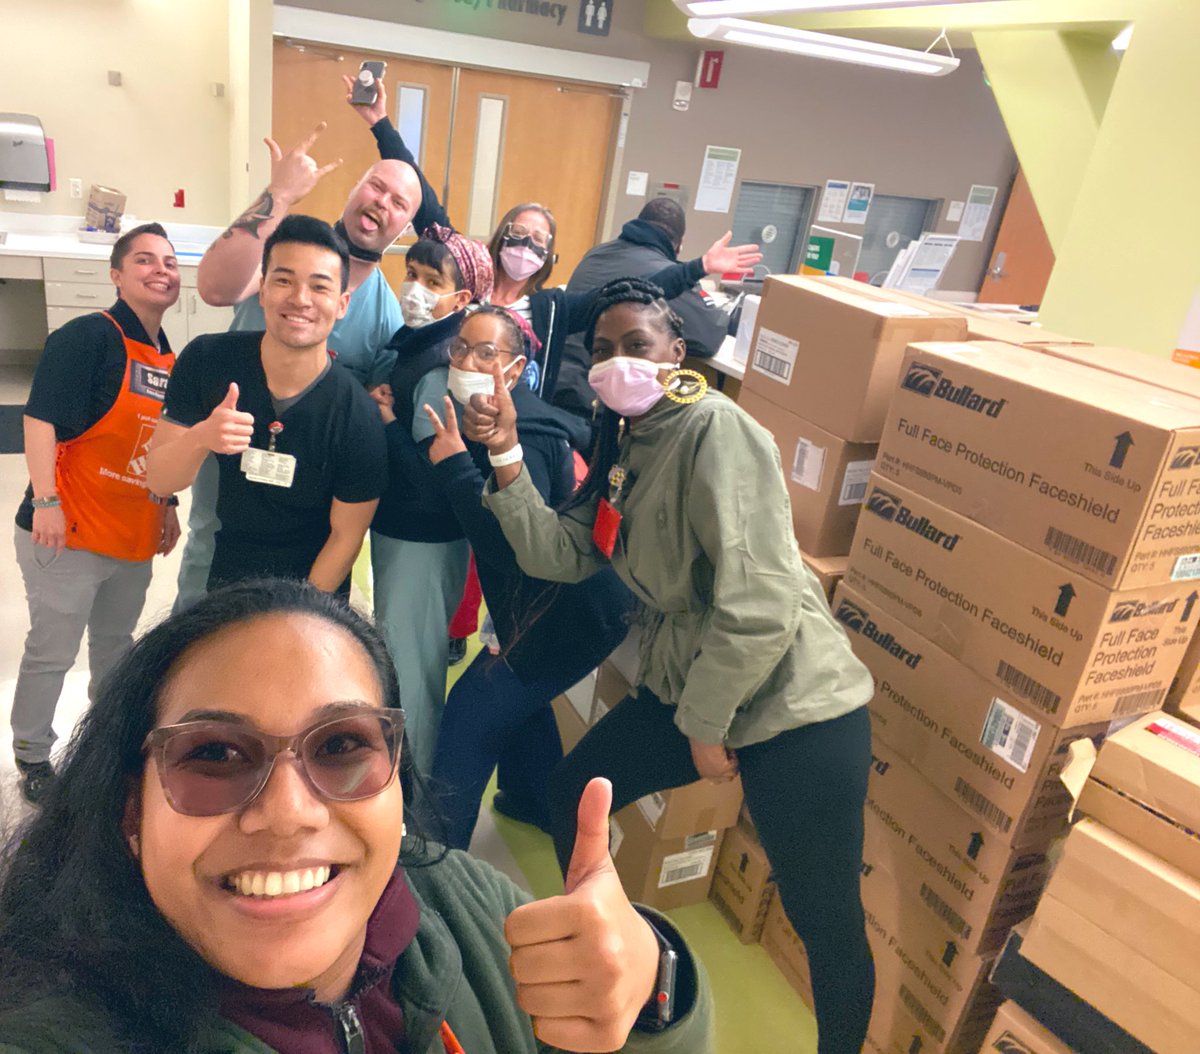 @aboutKP Thank you from the Emeryville Home Depot! This is the least we can do to help support all the hardworking nurses and doctors. Thank you for all you do!! #PacNorthProud #HomeDepot #DoingTheRightThing #OaklandKaiser